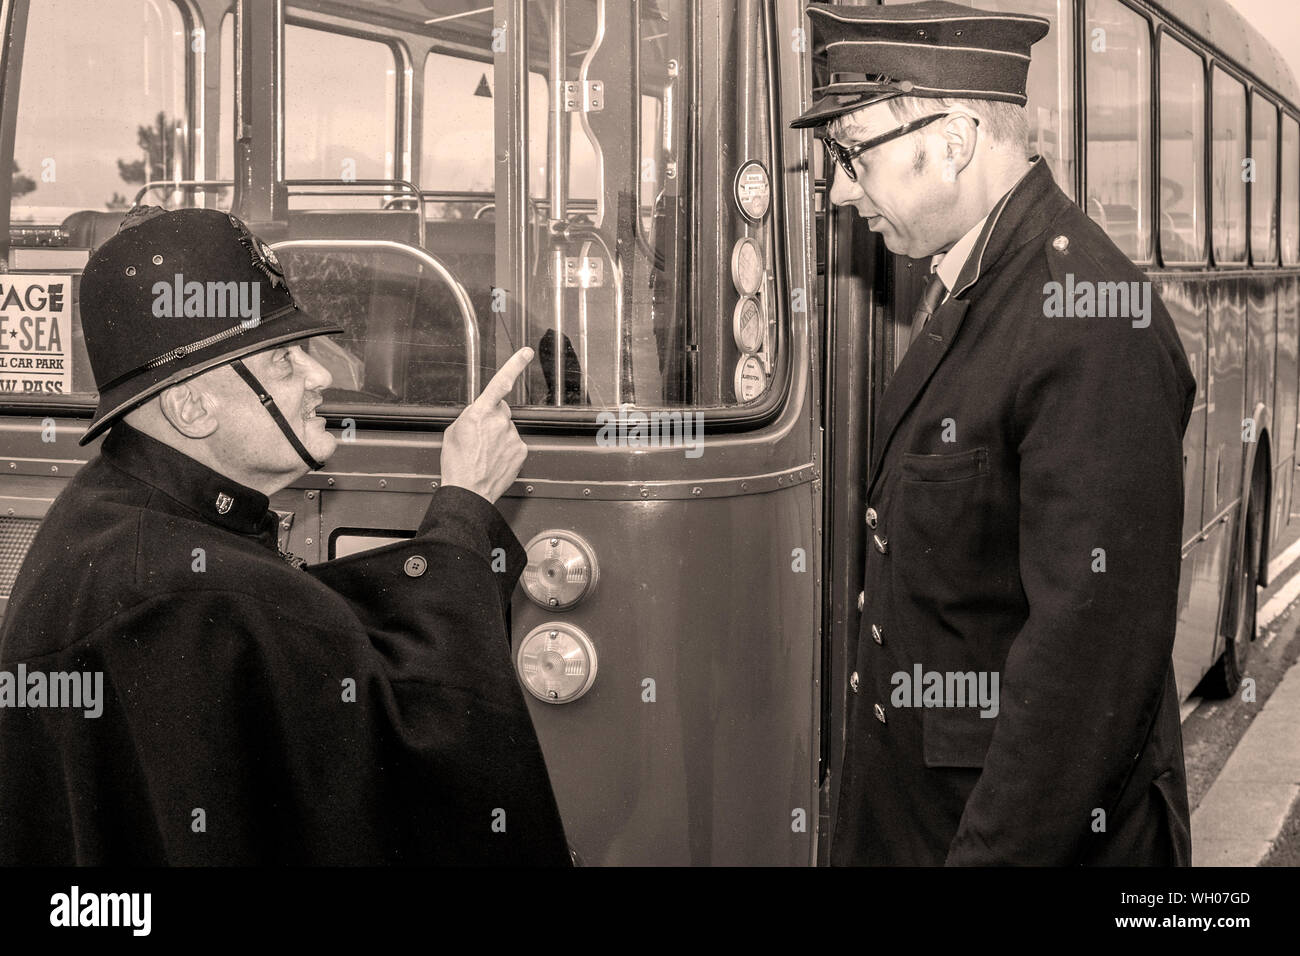 British Police constable admonishing bus driver; Morecambe historical seafront events; 1930s, 1940s,1950s, retro fashion festival Vintage by the sea, people in costume, reenactors in period costumes, authentic period clothing, wartime fancy dress, historical costumes, reenactment clothes, UK Stock Photo